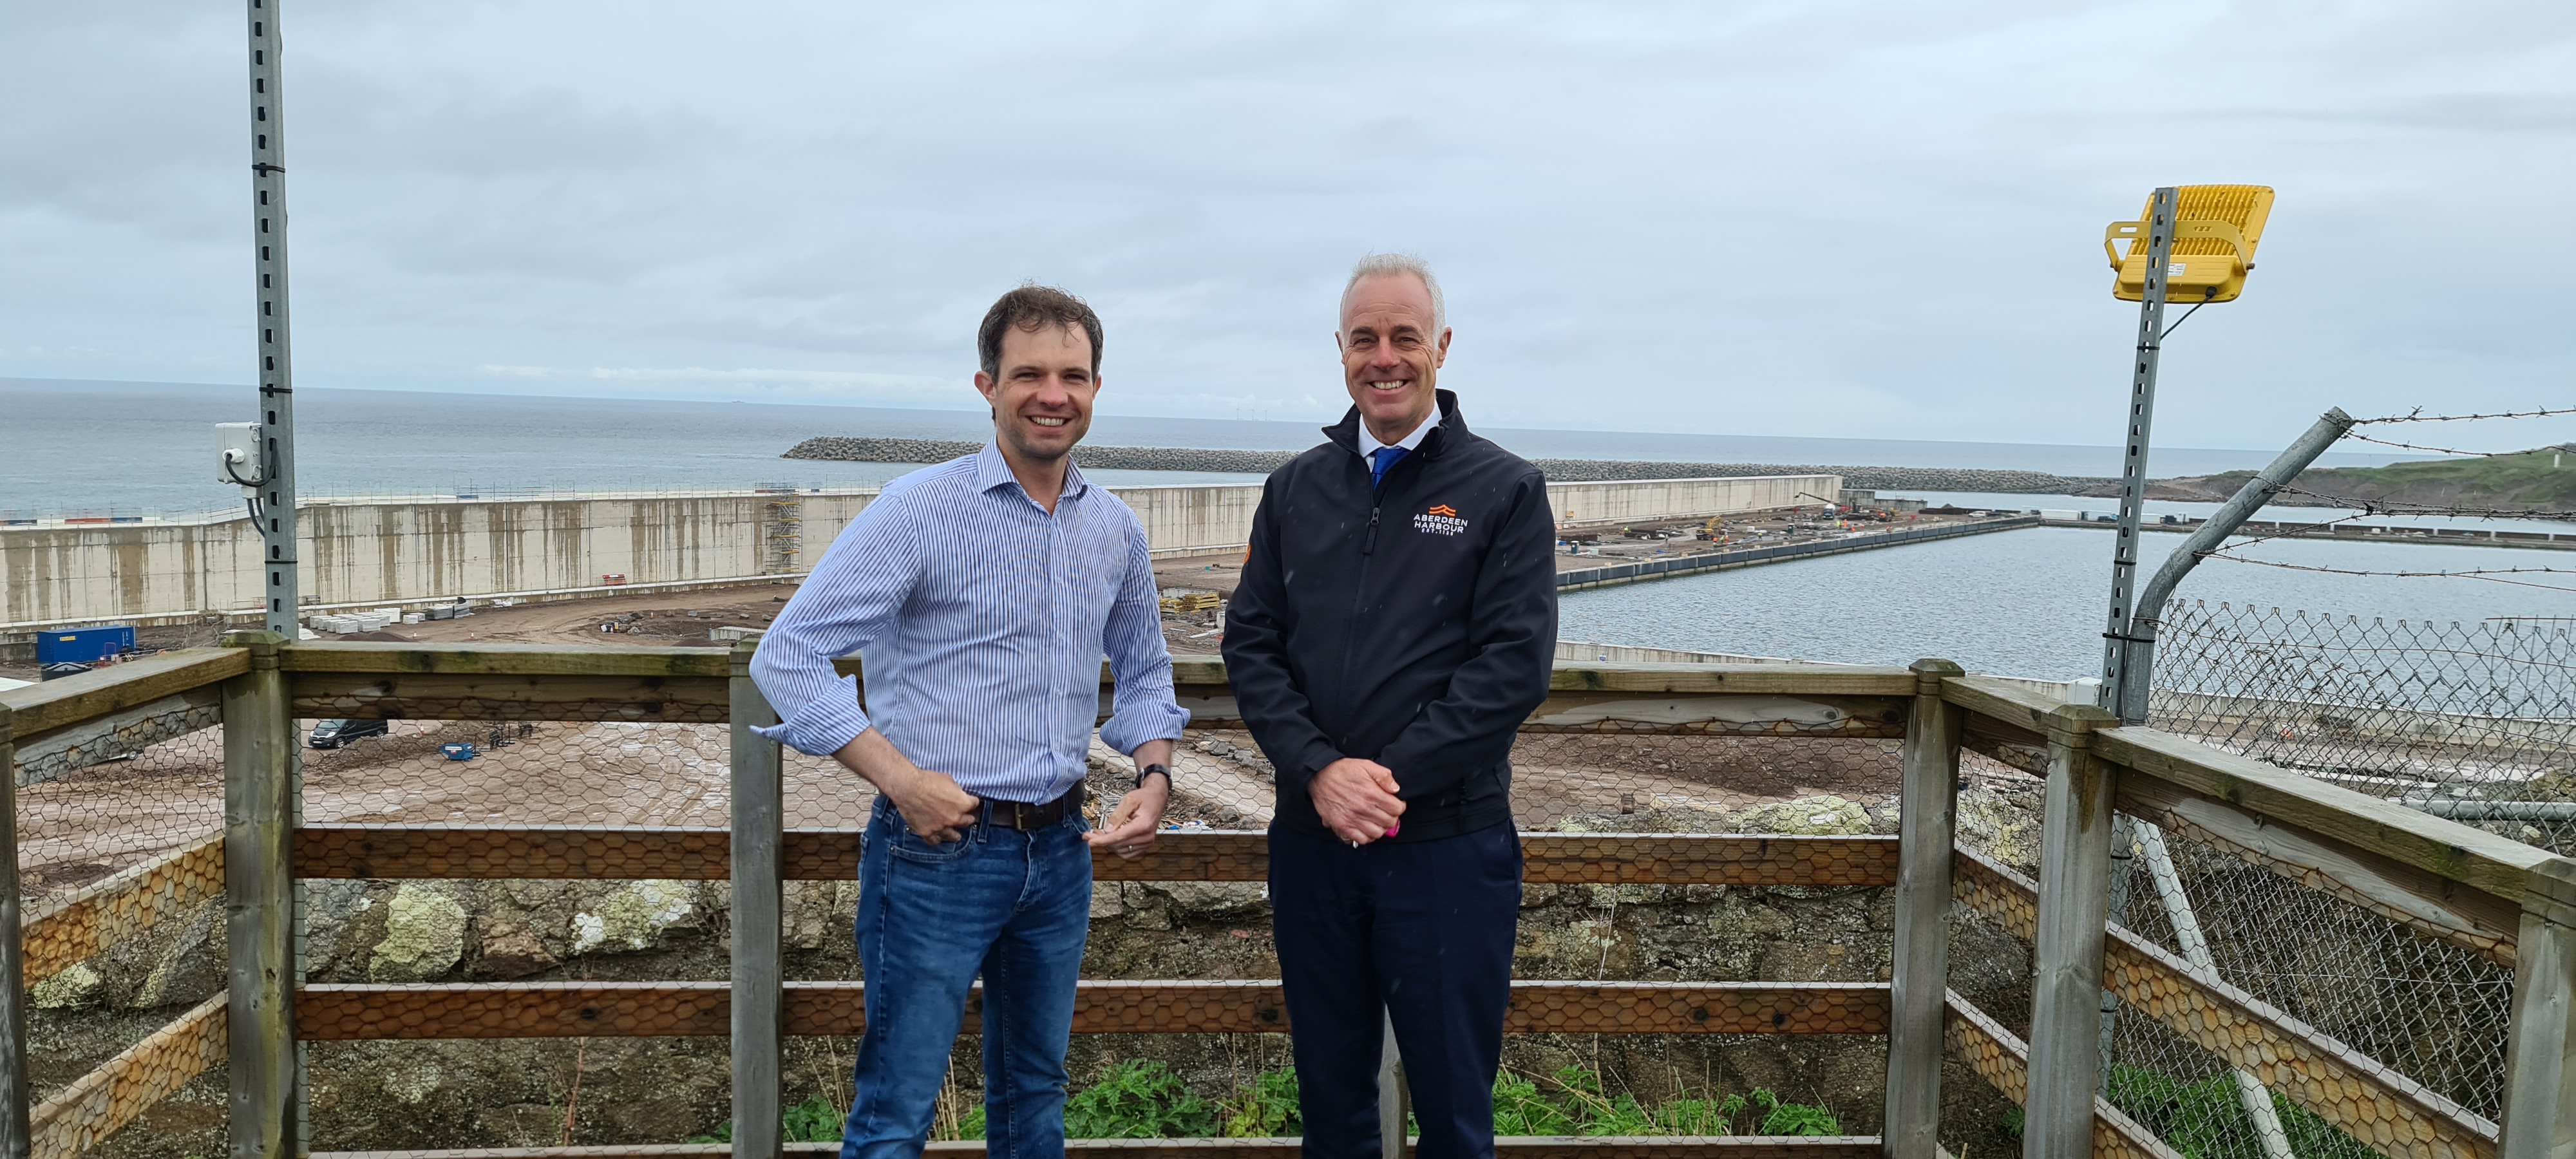 Andrew Bowie MP and Port of Aberdeen CEO Bob Sanguinetti